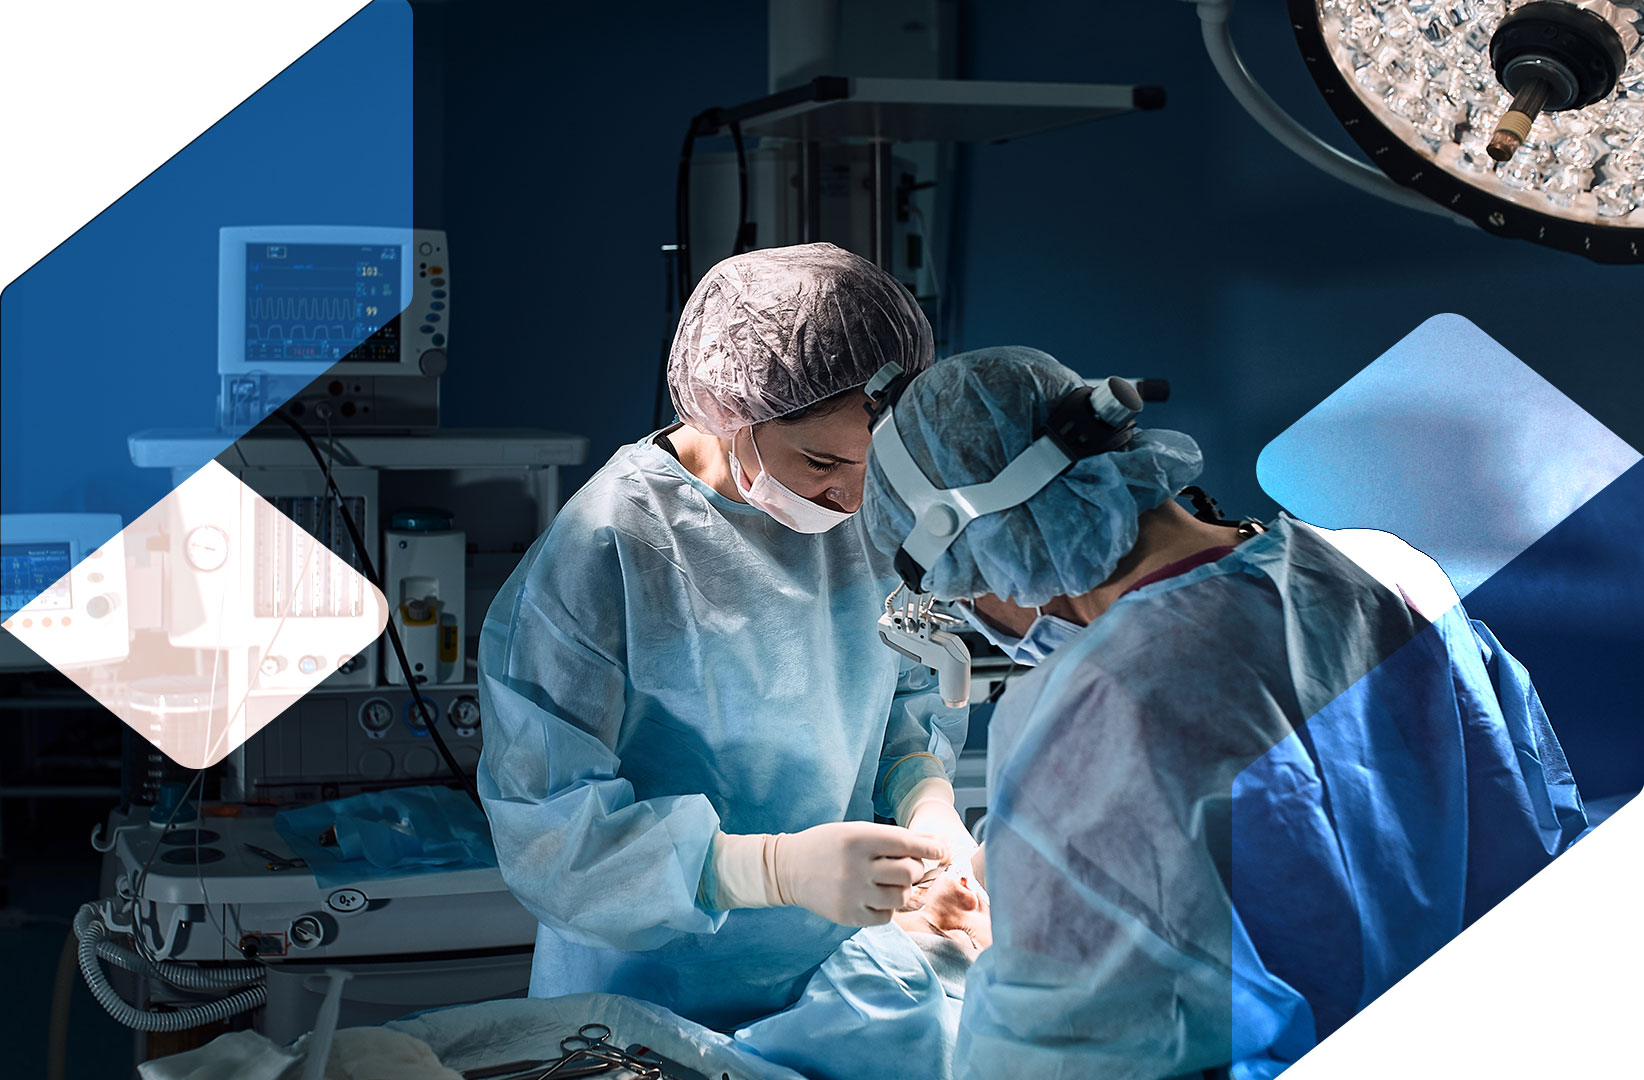 General surgery involves the treatment of a wide range of conditions affecting various parts of the body, including the digestive system, abdomen, and other internal organs.